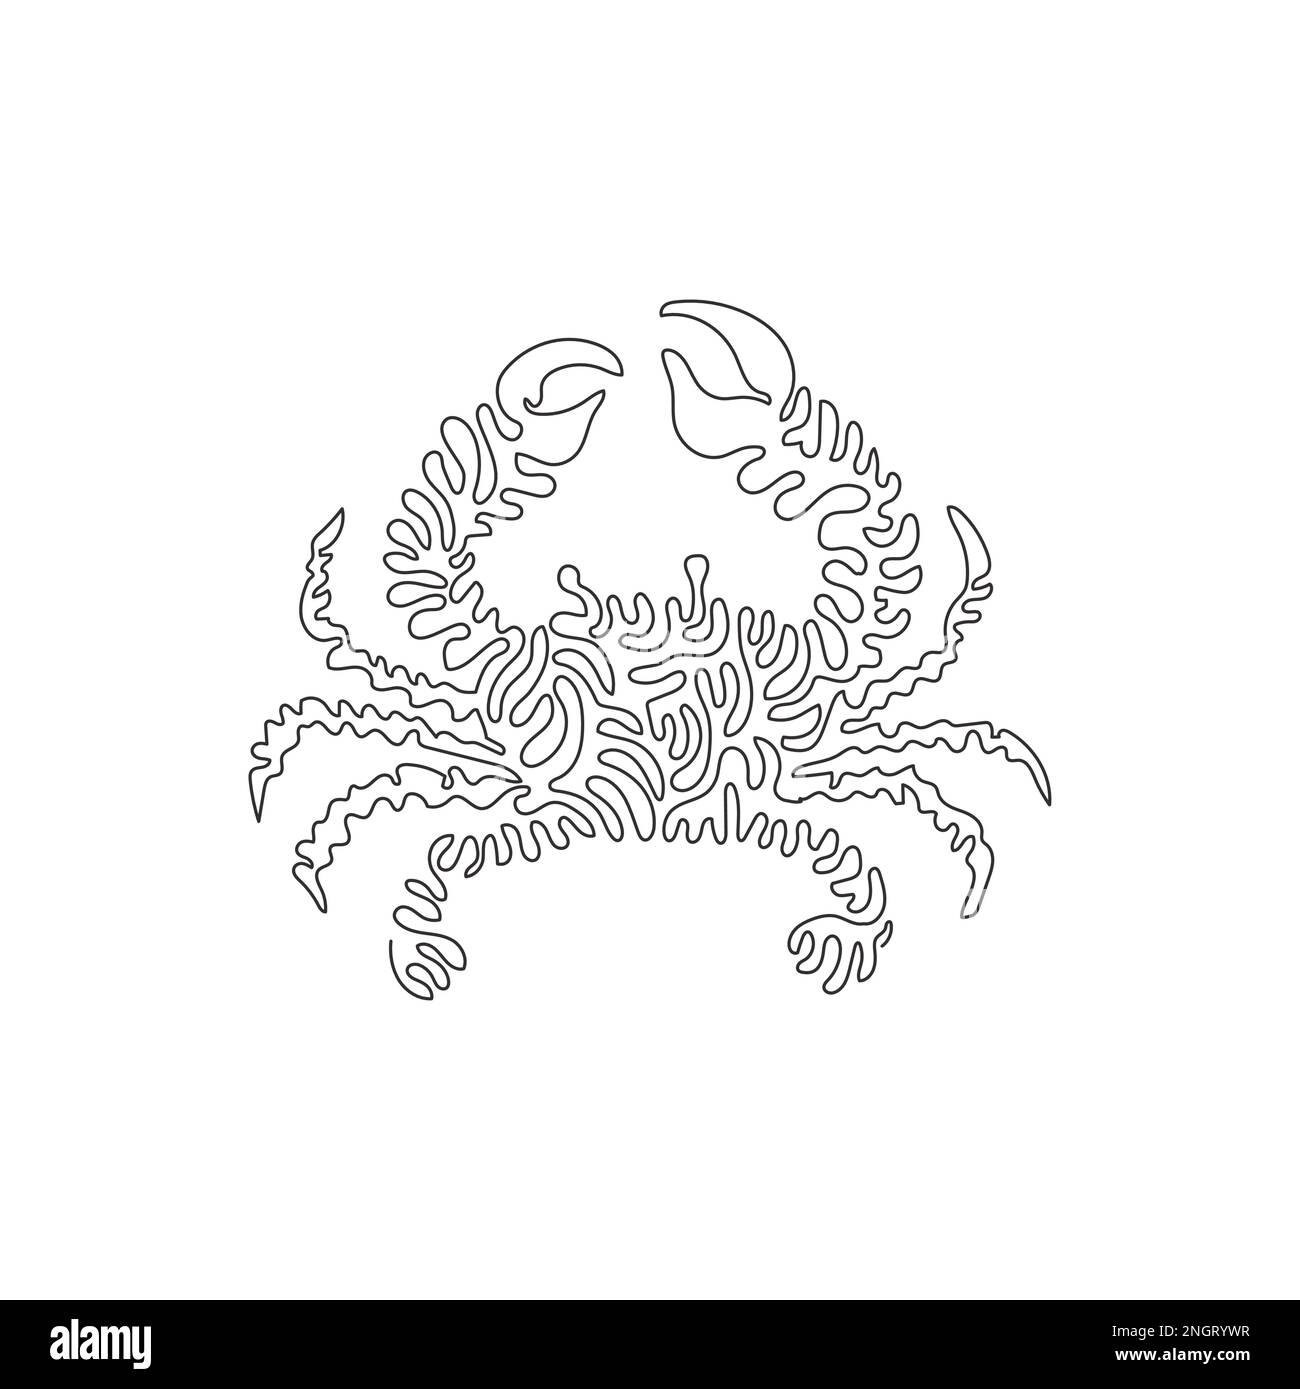 Single one curly line drawing of adorable crab. Continuous line drawing graphic design vector illustration of crabs have two claws Stock Vector